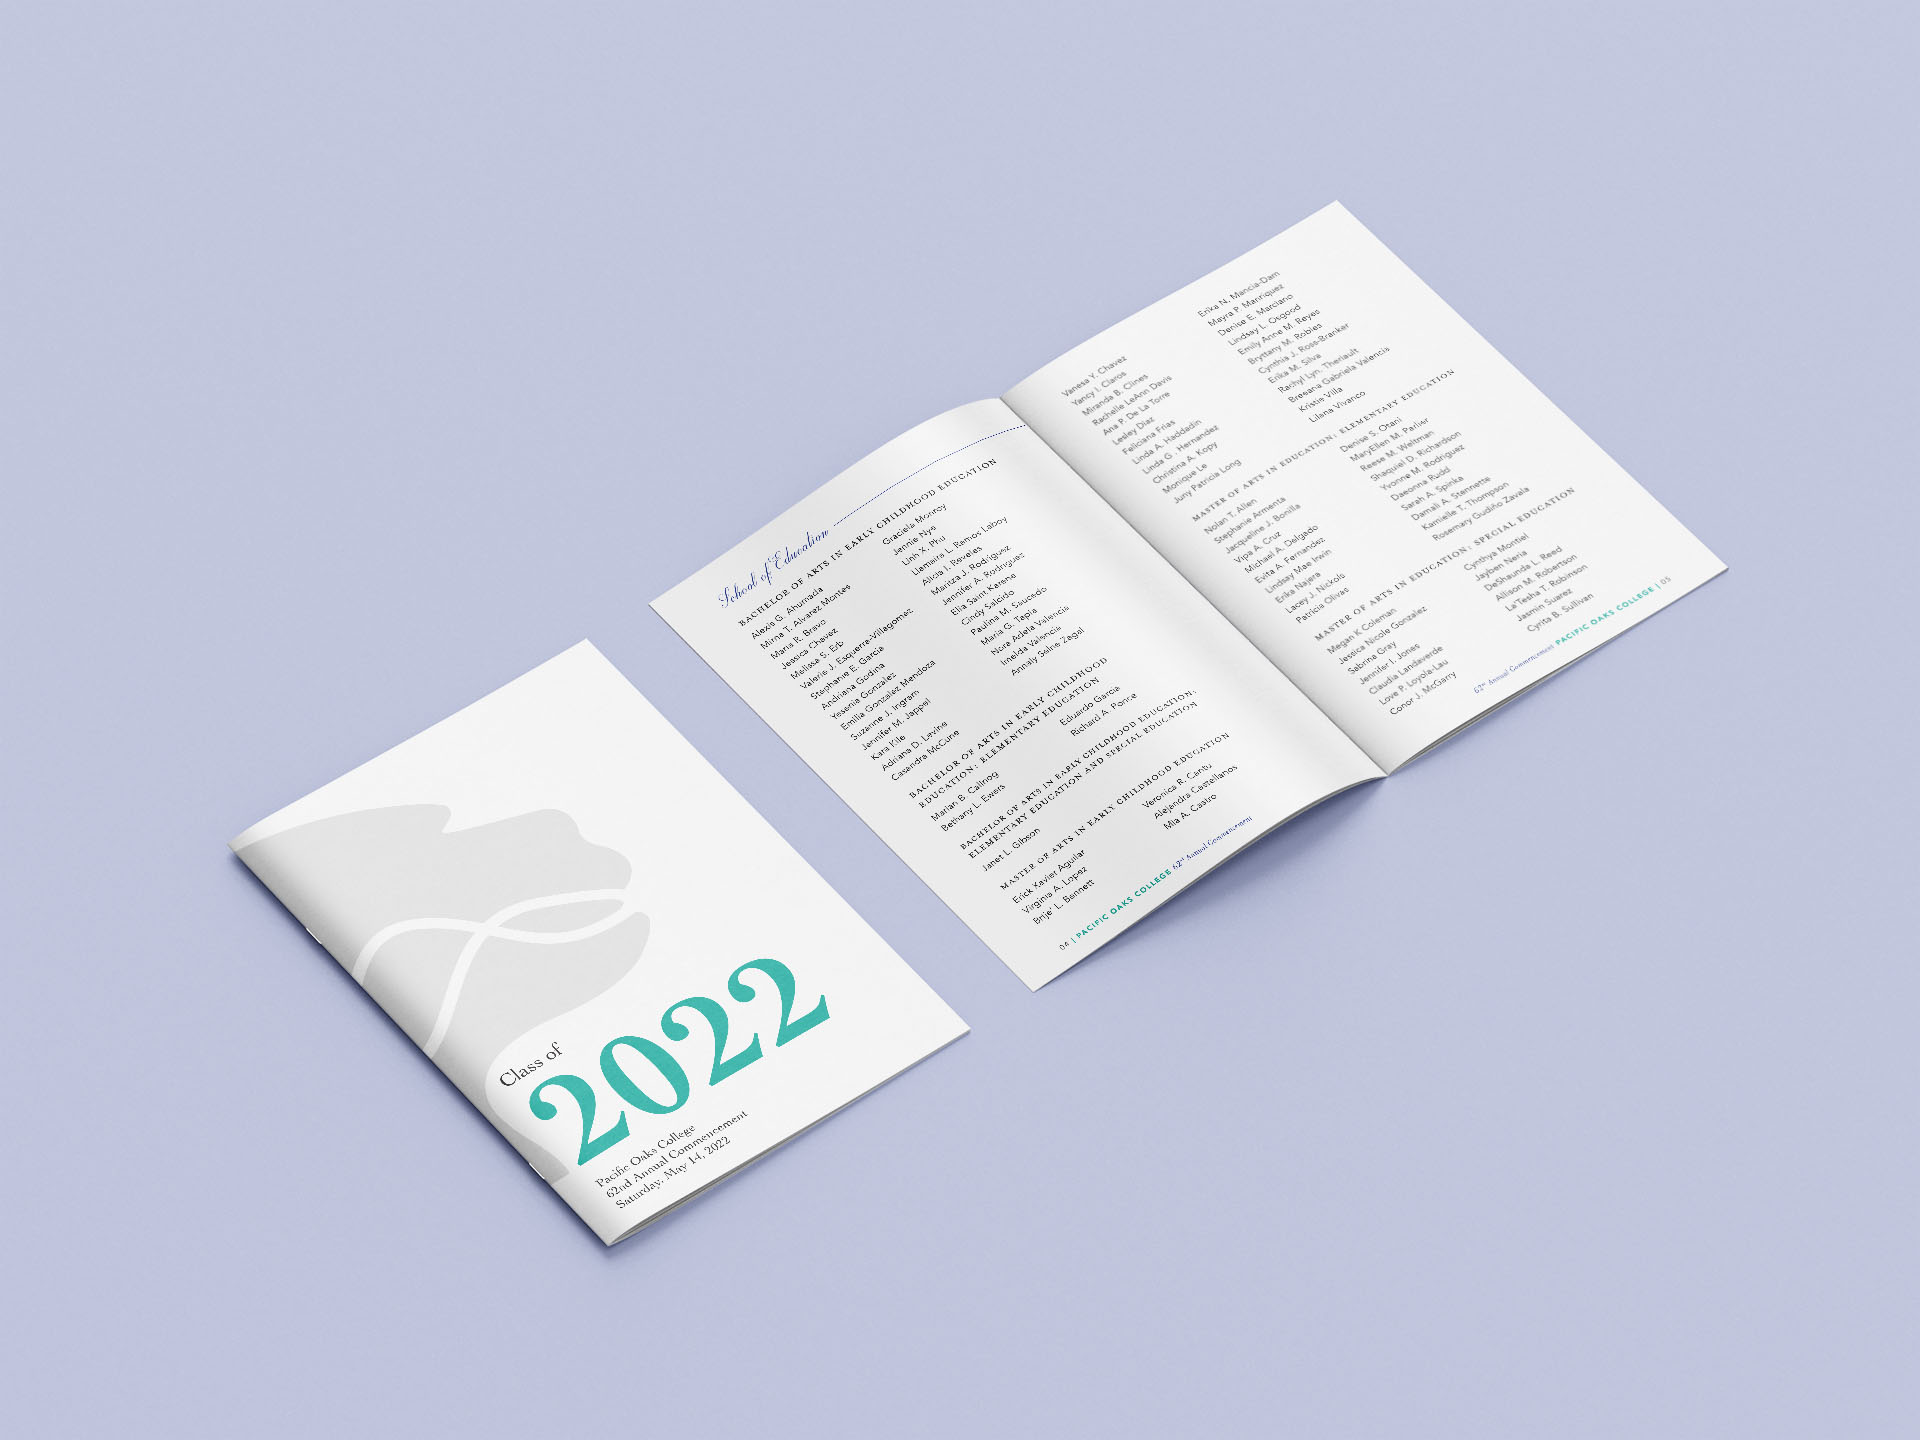 Pacific Oaks 2022 Commencement Booklet Mockup